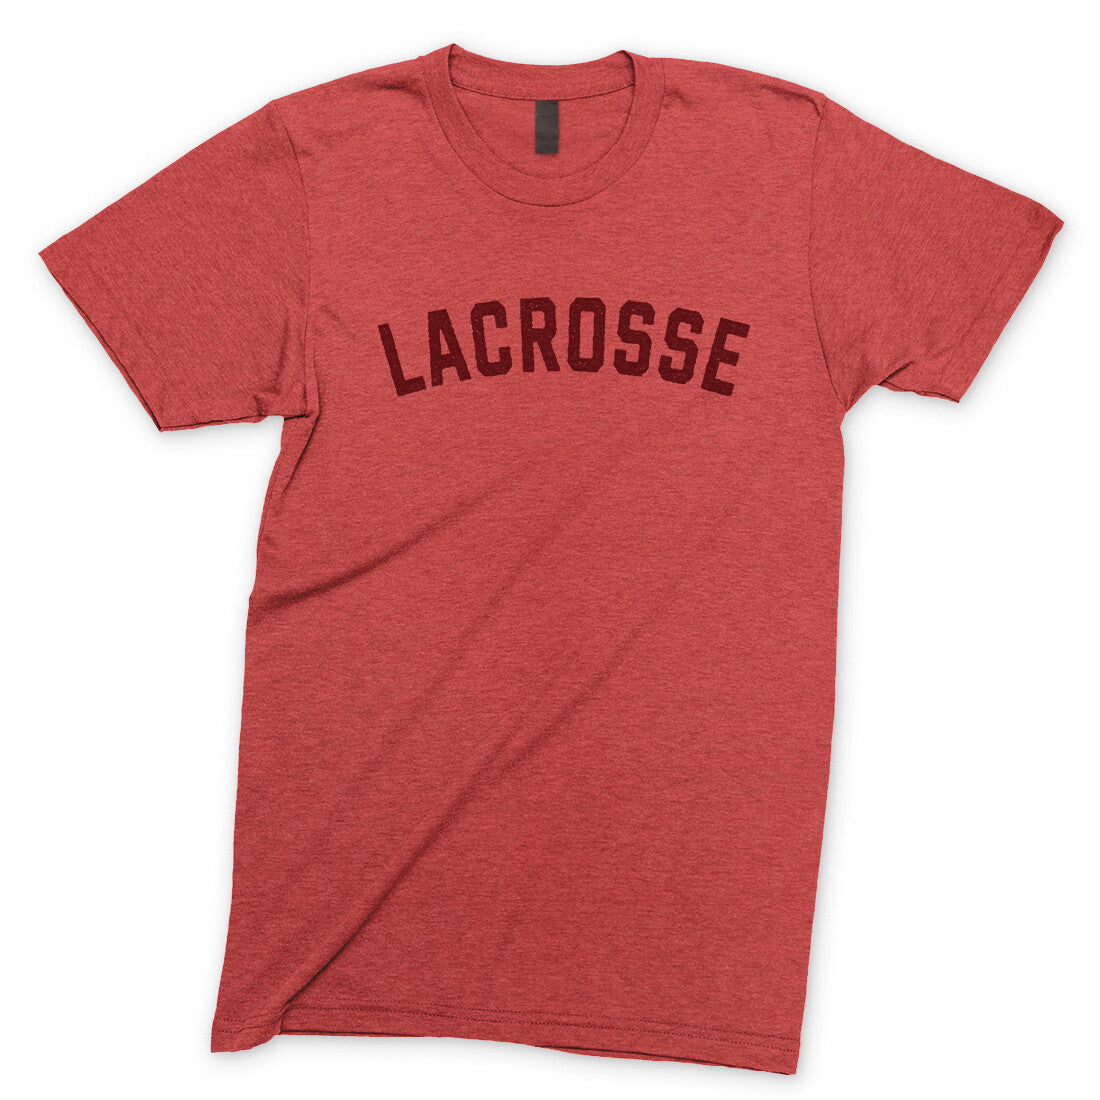 Lacrosse in Heather Red Color